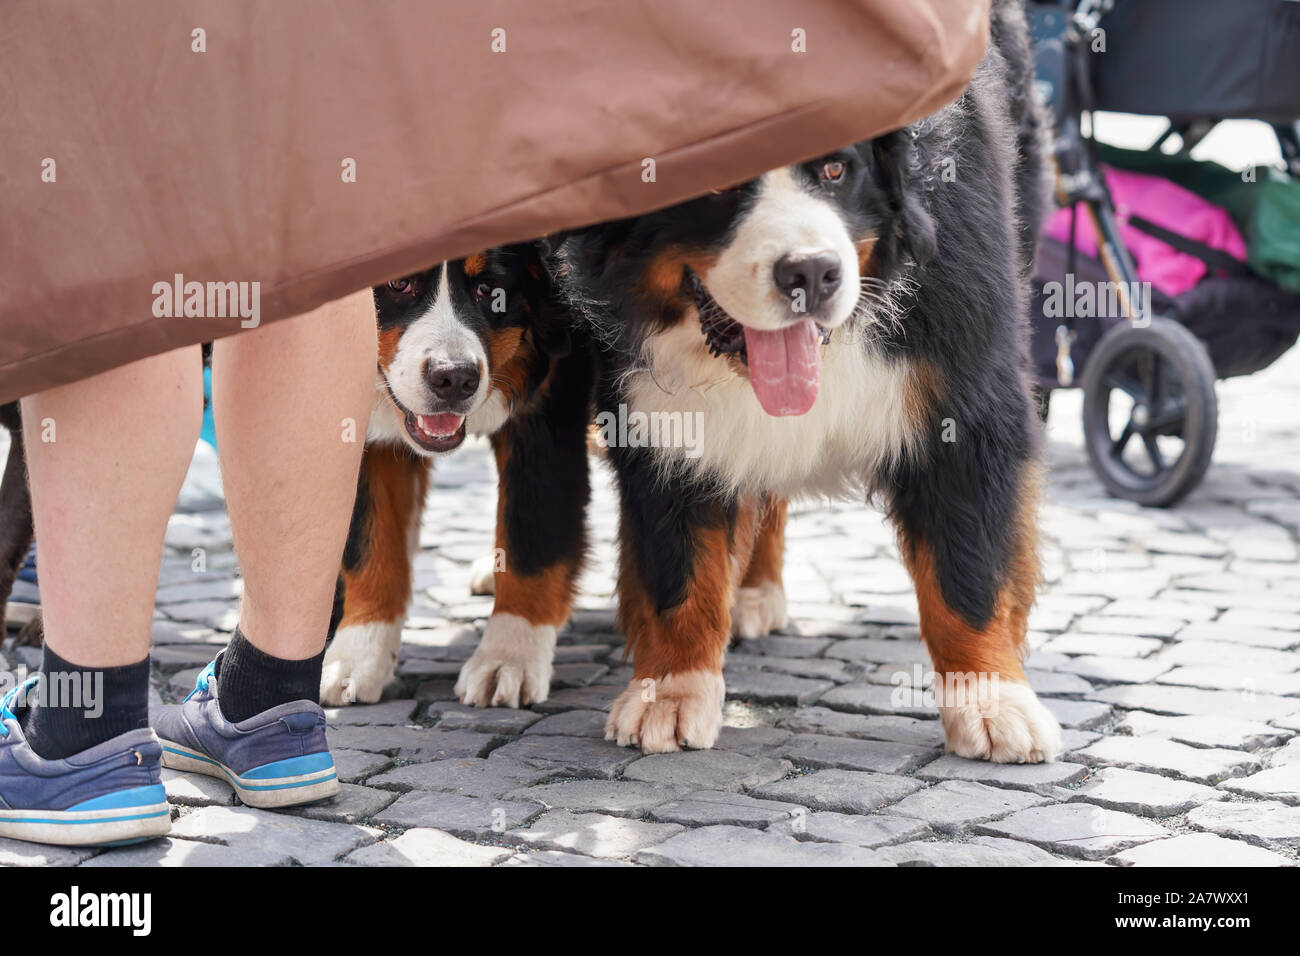 Two Bernese Mountain Dogs standing on cobblestone sidewalk, heads hidden behind piece of cloth, owner legs near Stock Photo